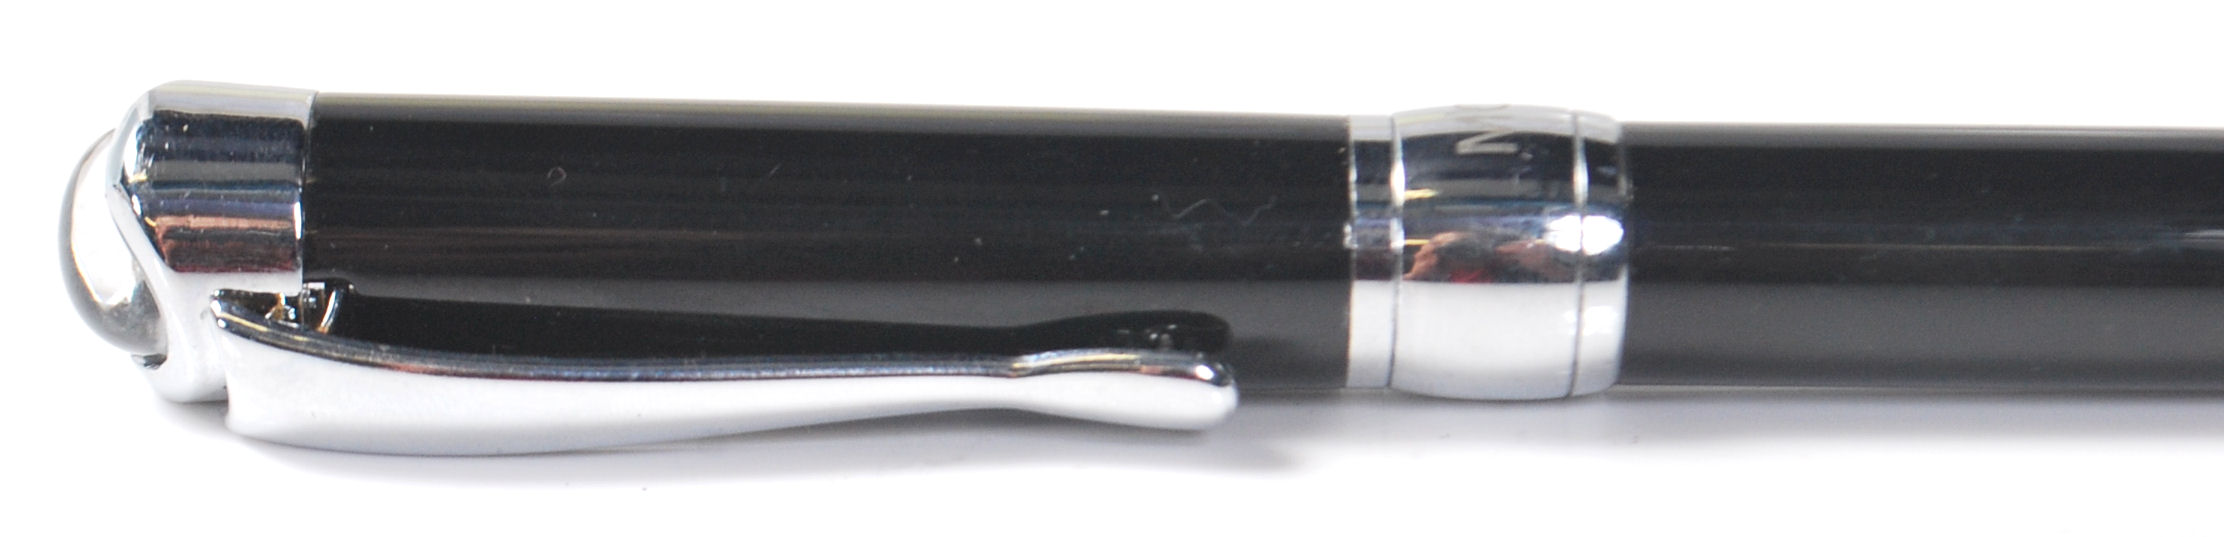 A MONTHBLANC BLACK AND WHITE METAL FOUNTAIN PEN - Image 5 of 8